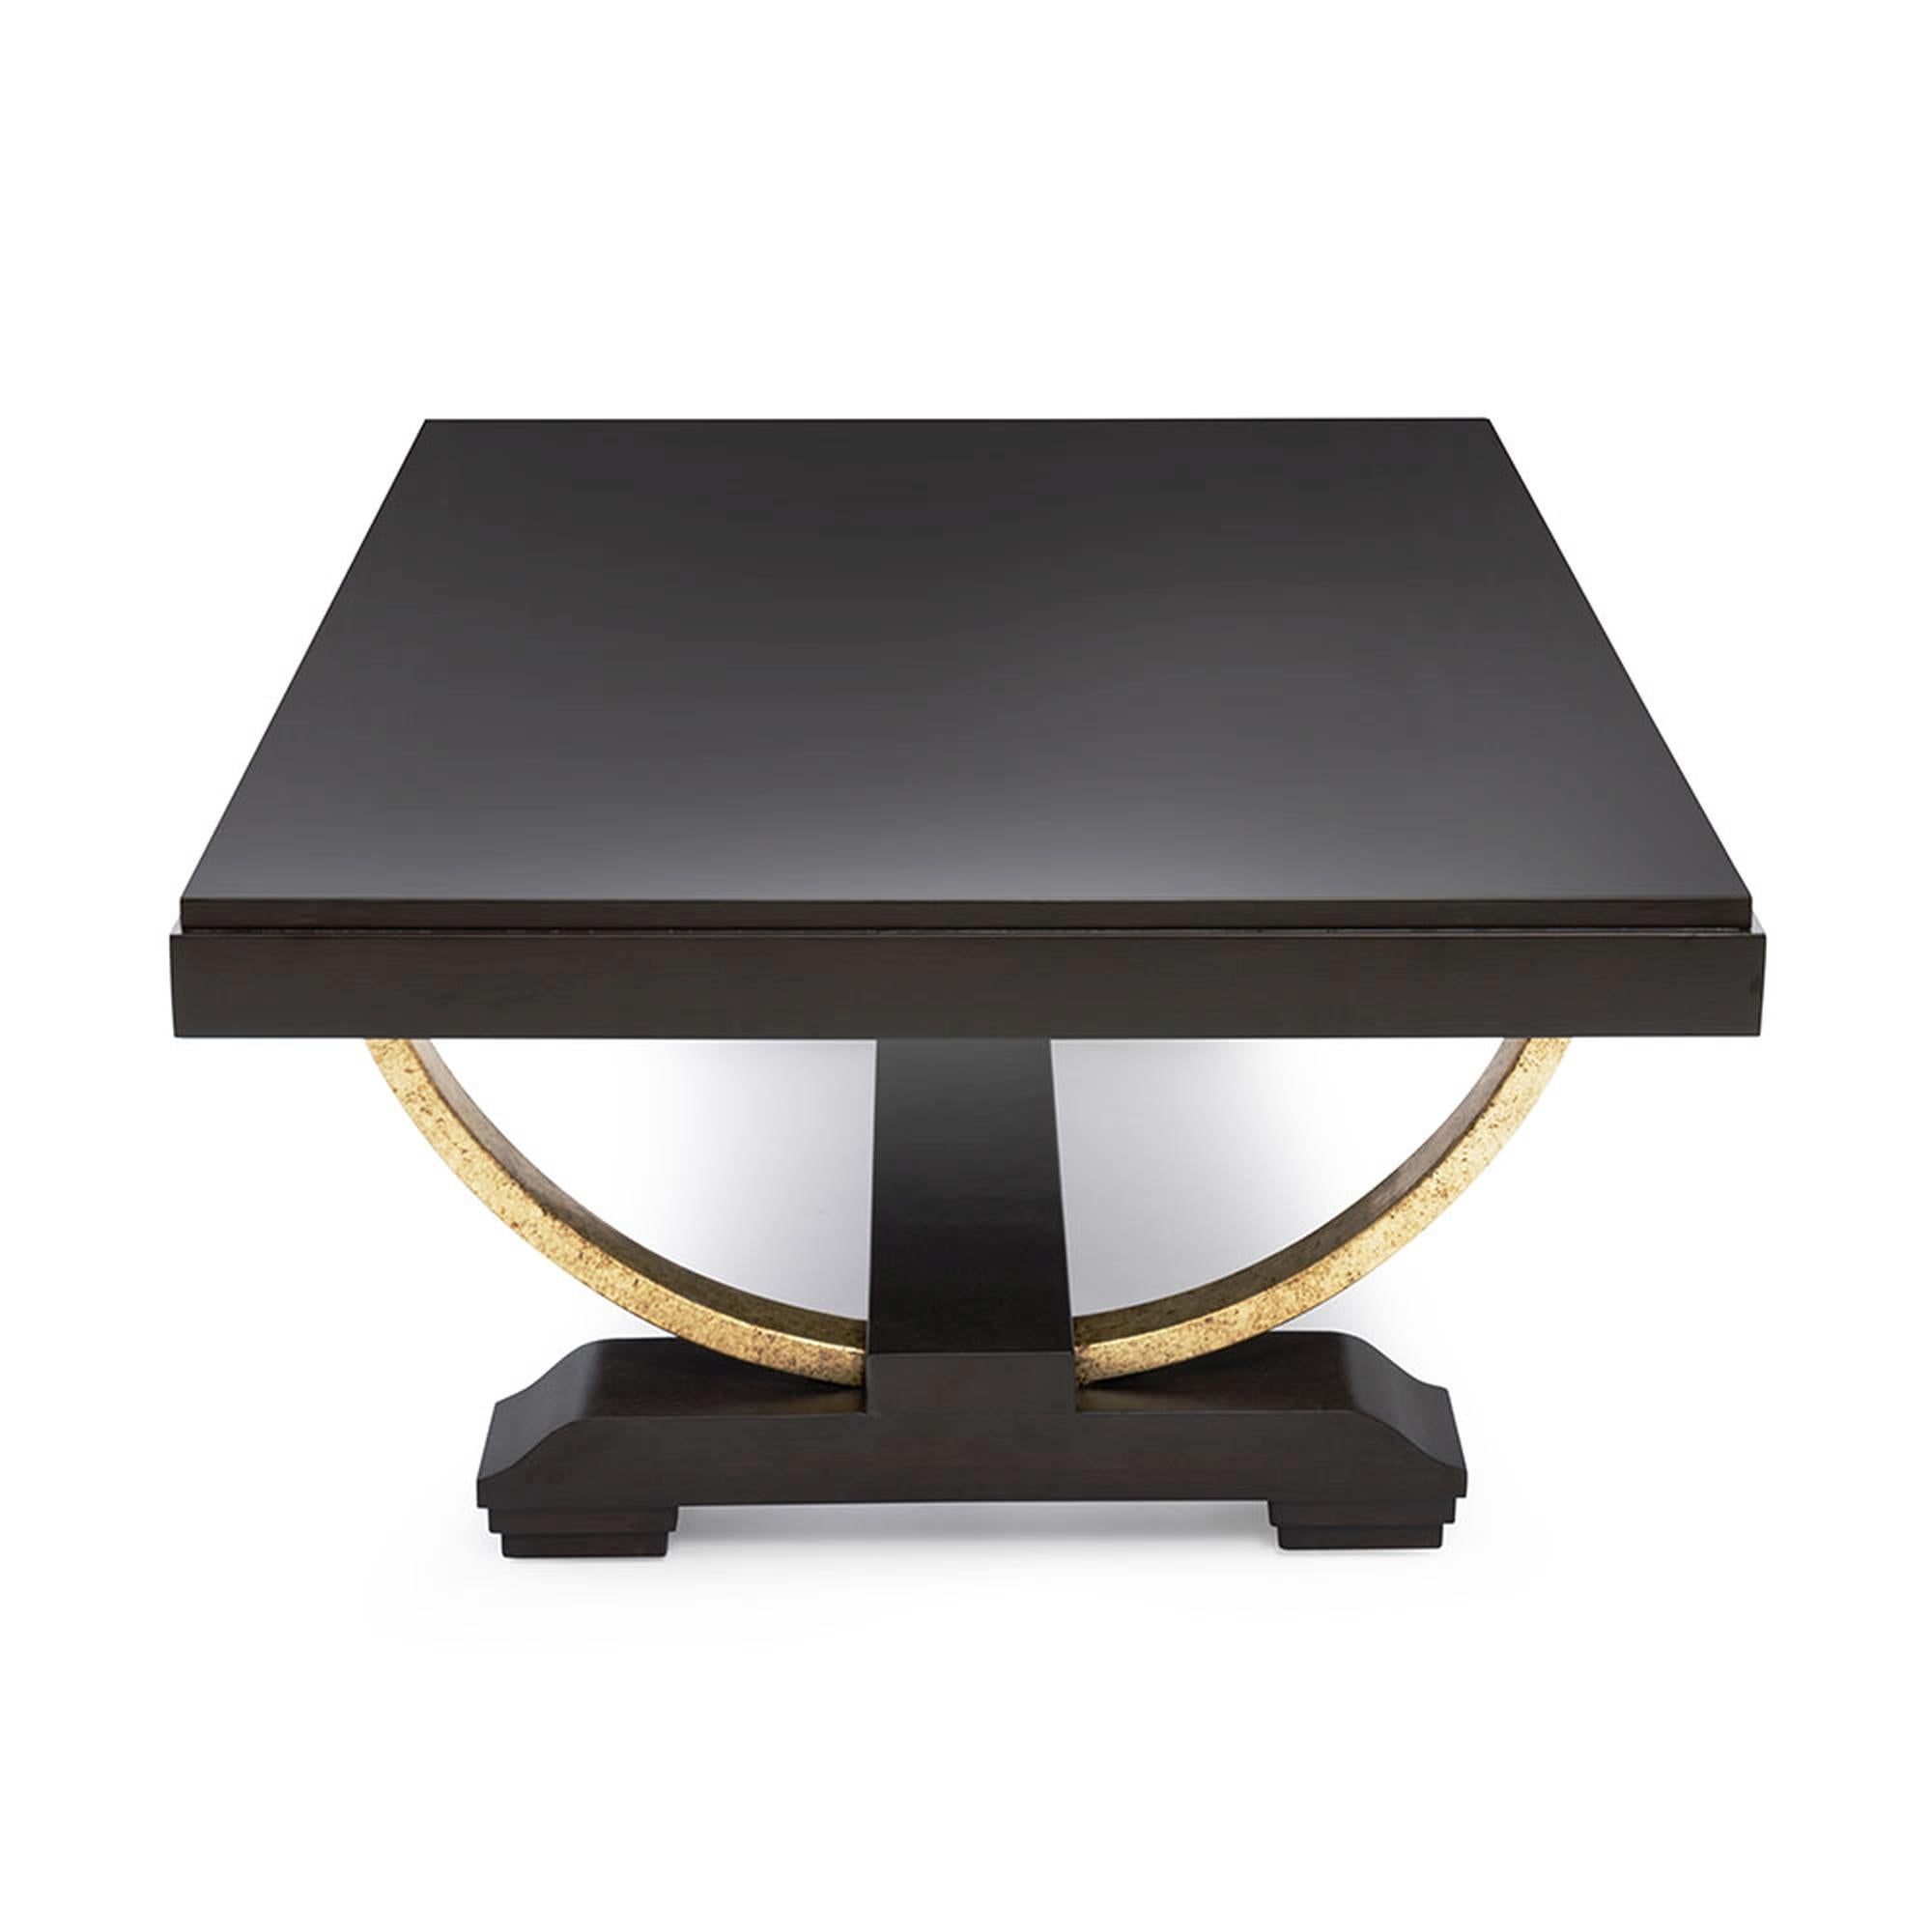 Modern Bel Air Coffee Table in Chocolate and Antiqued Gold by Innova Luxuxy Group For Sale